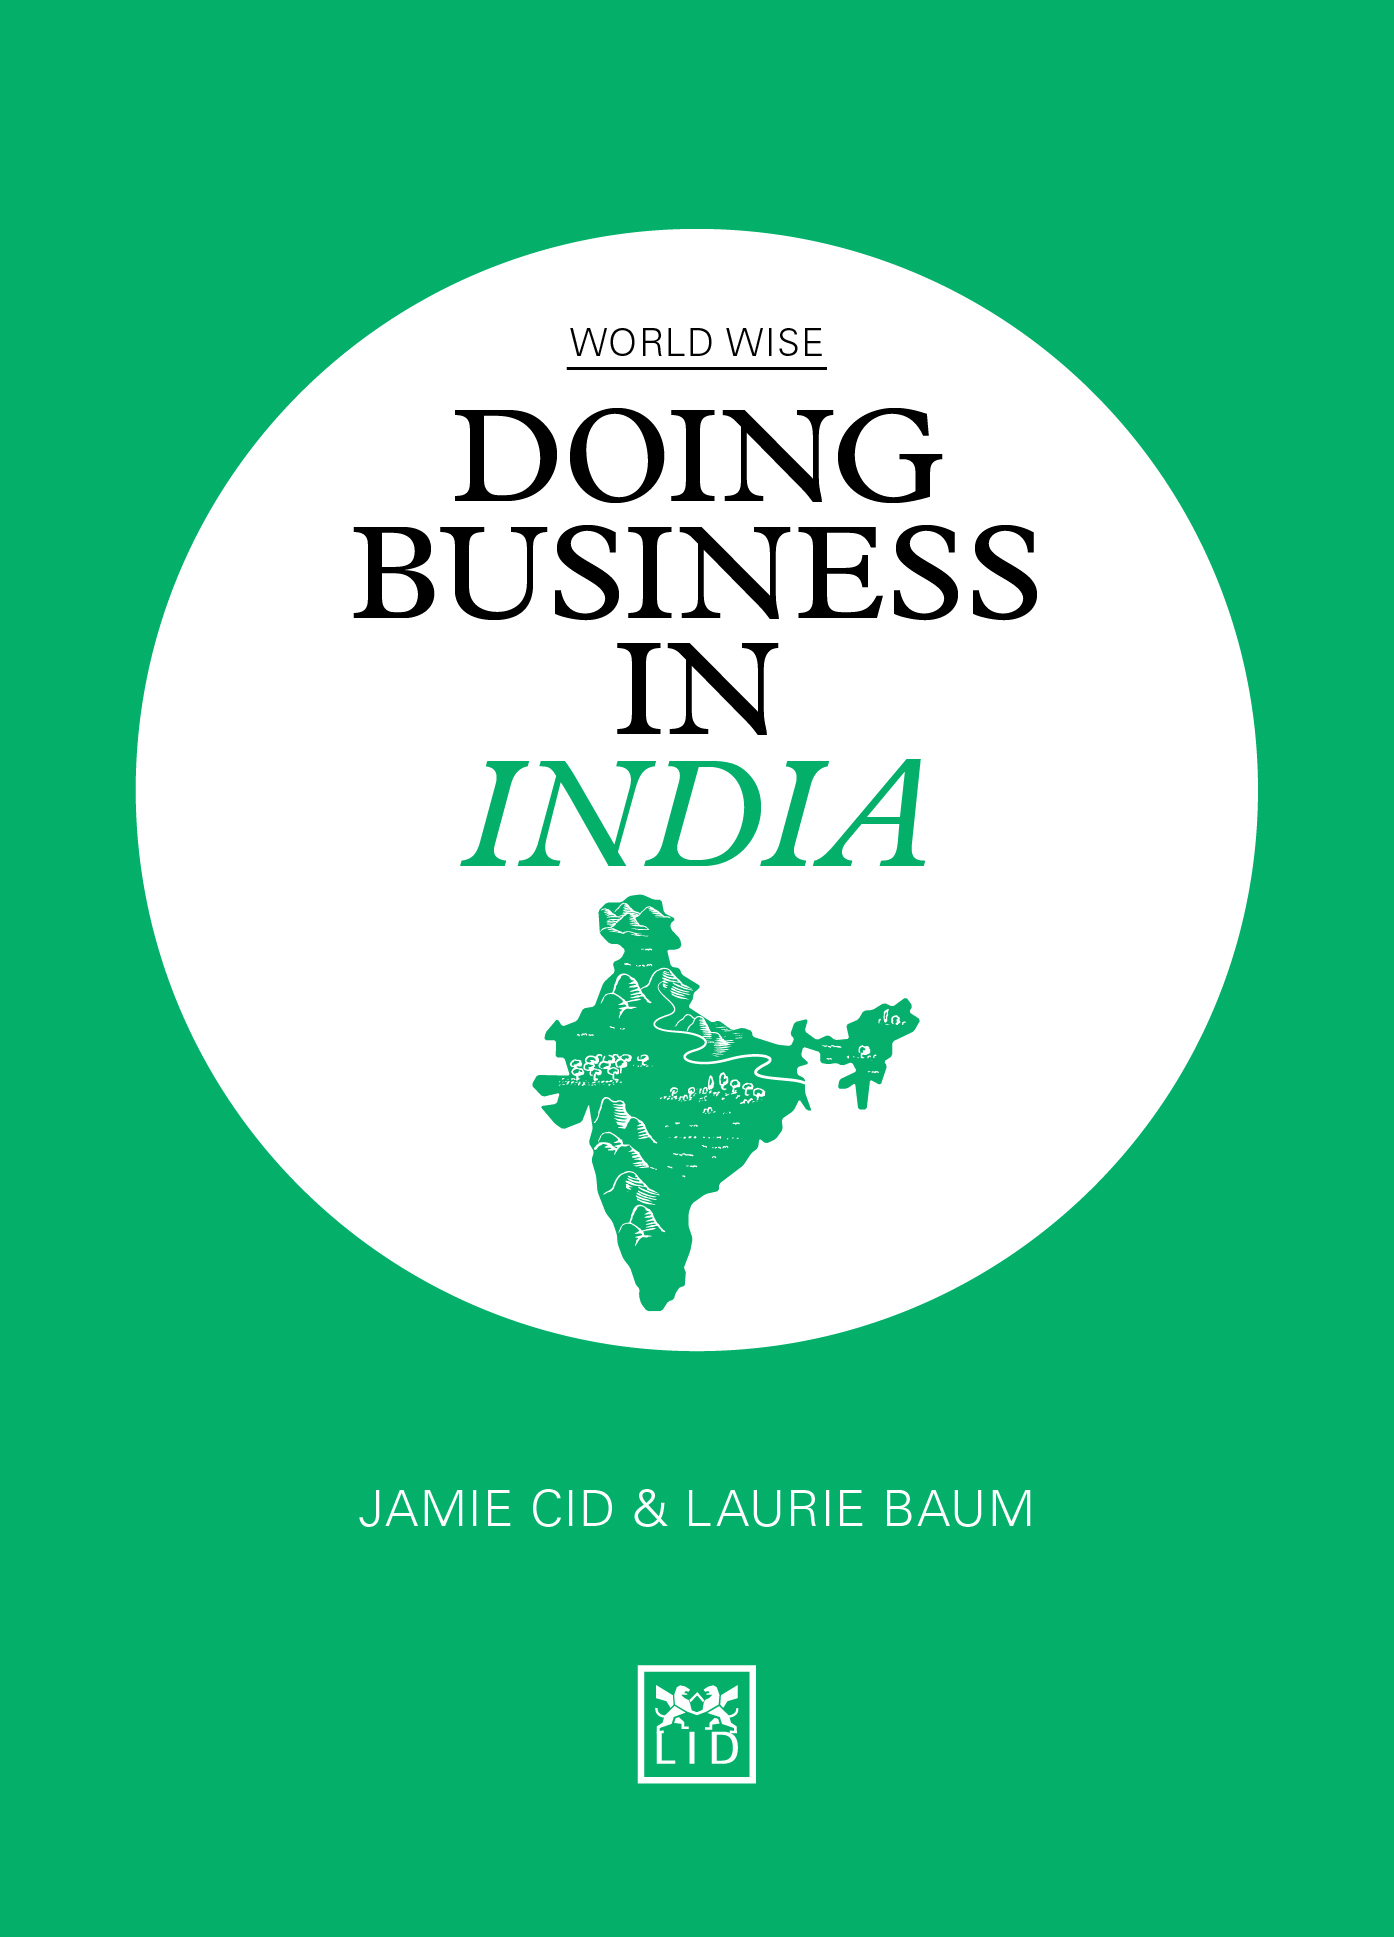 Book cover of  "Doing Business In India".